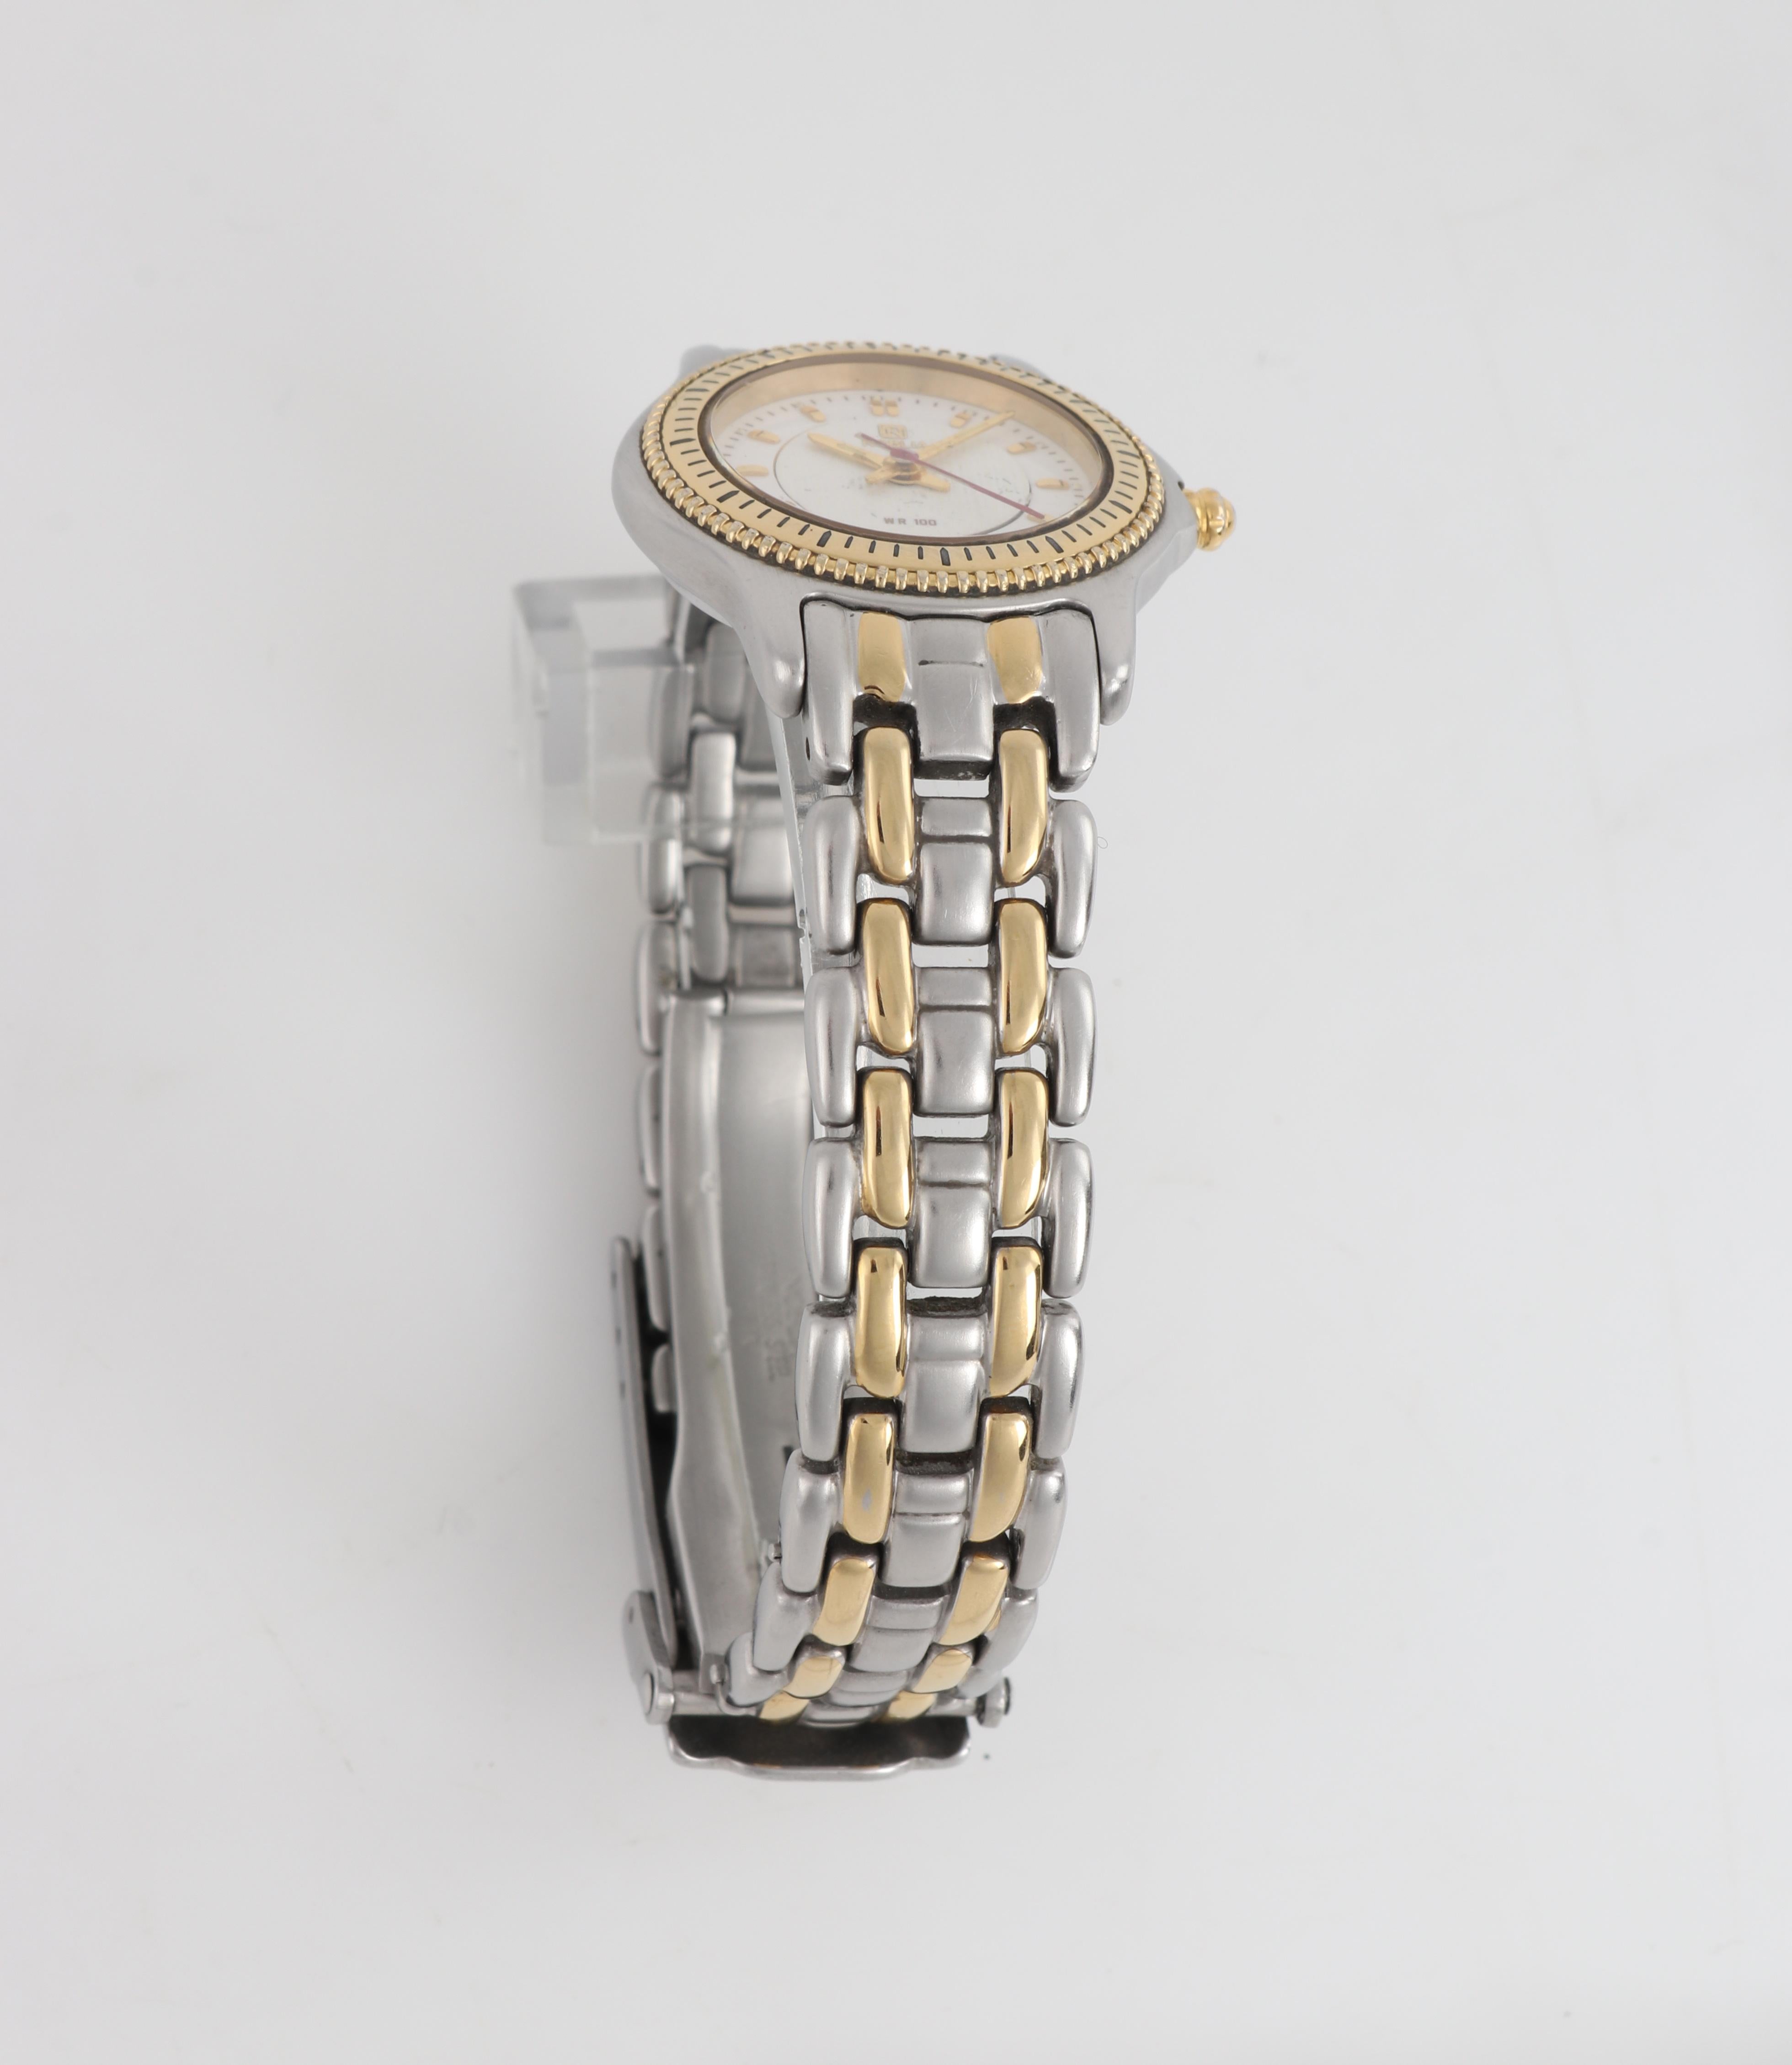 NOBLIA '12' METER Louis Vuitton Cup c.1995 Two-Tone Stainless Steel Wrist Watch For Sale 1